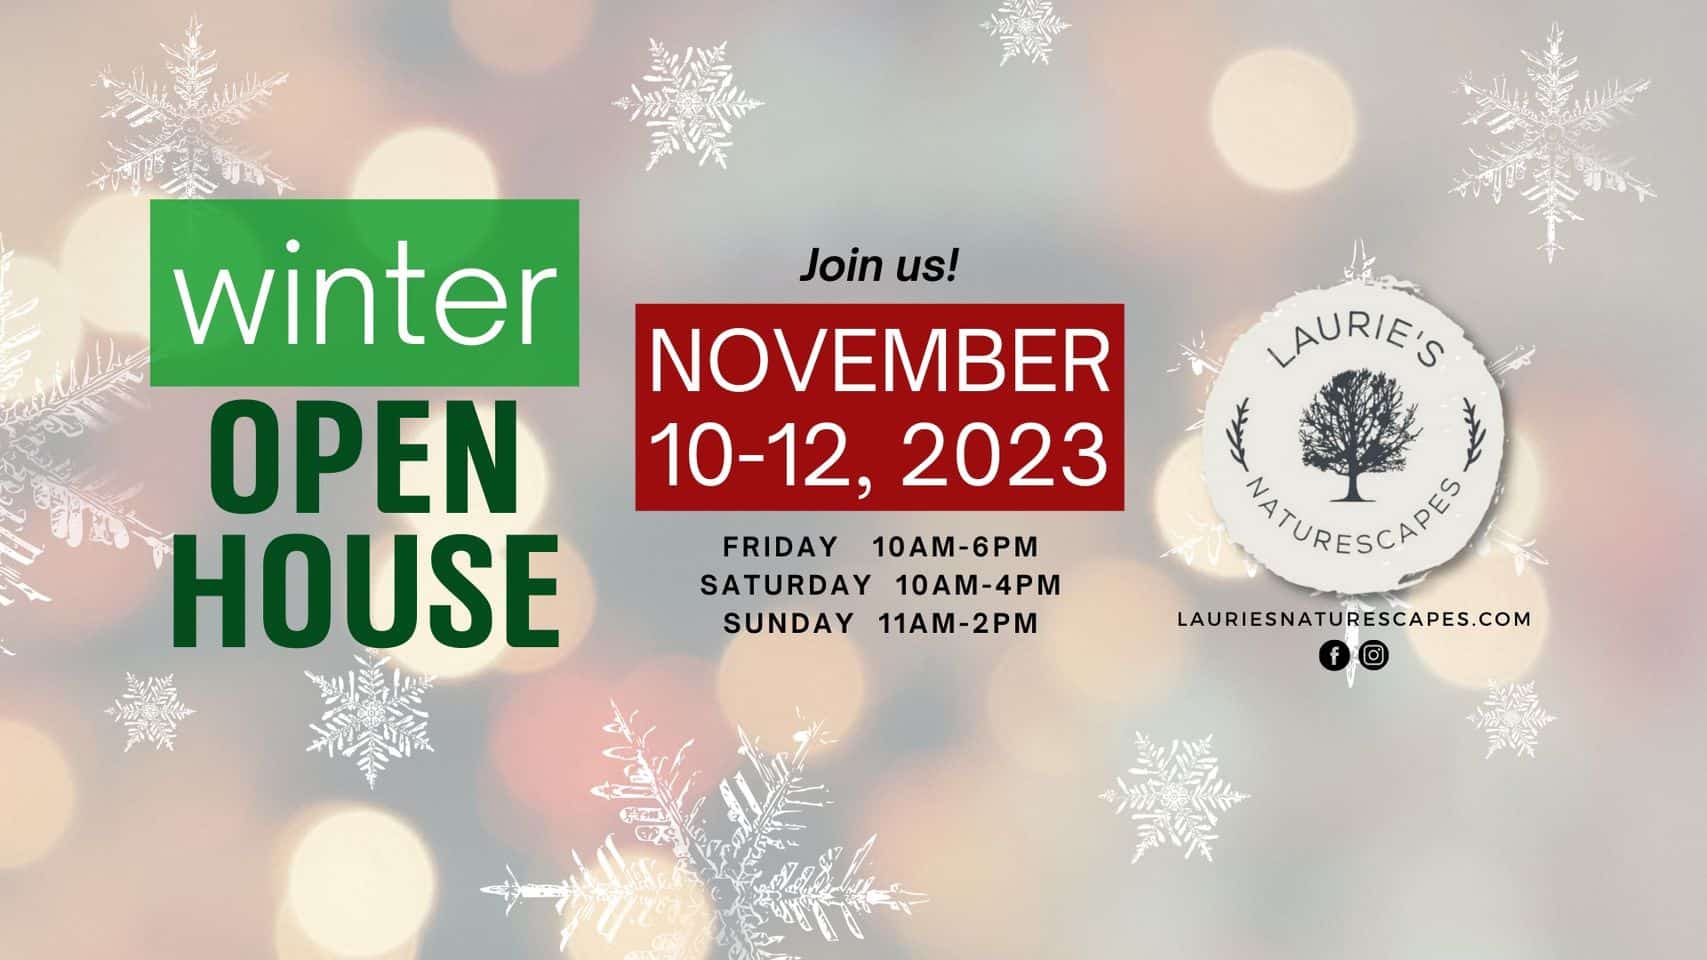 Laurie’s Naturescapes Winter Open House